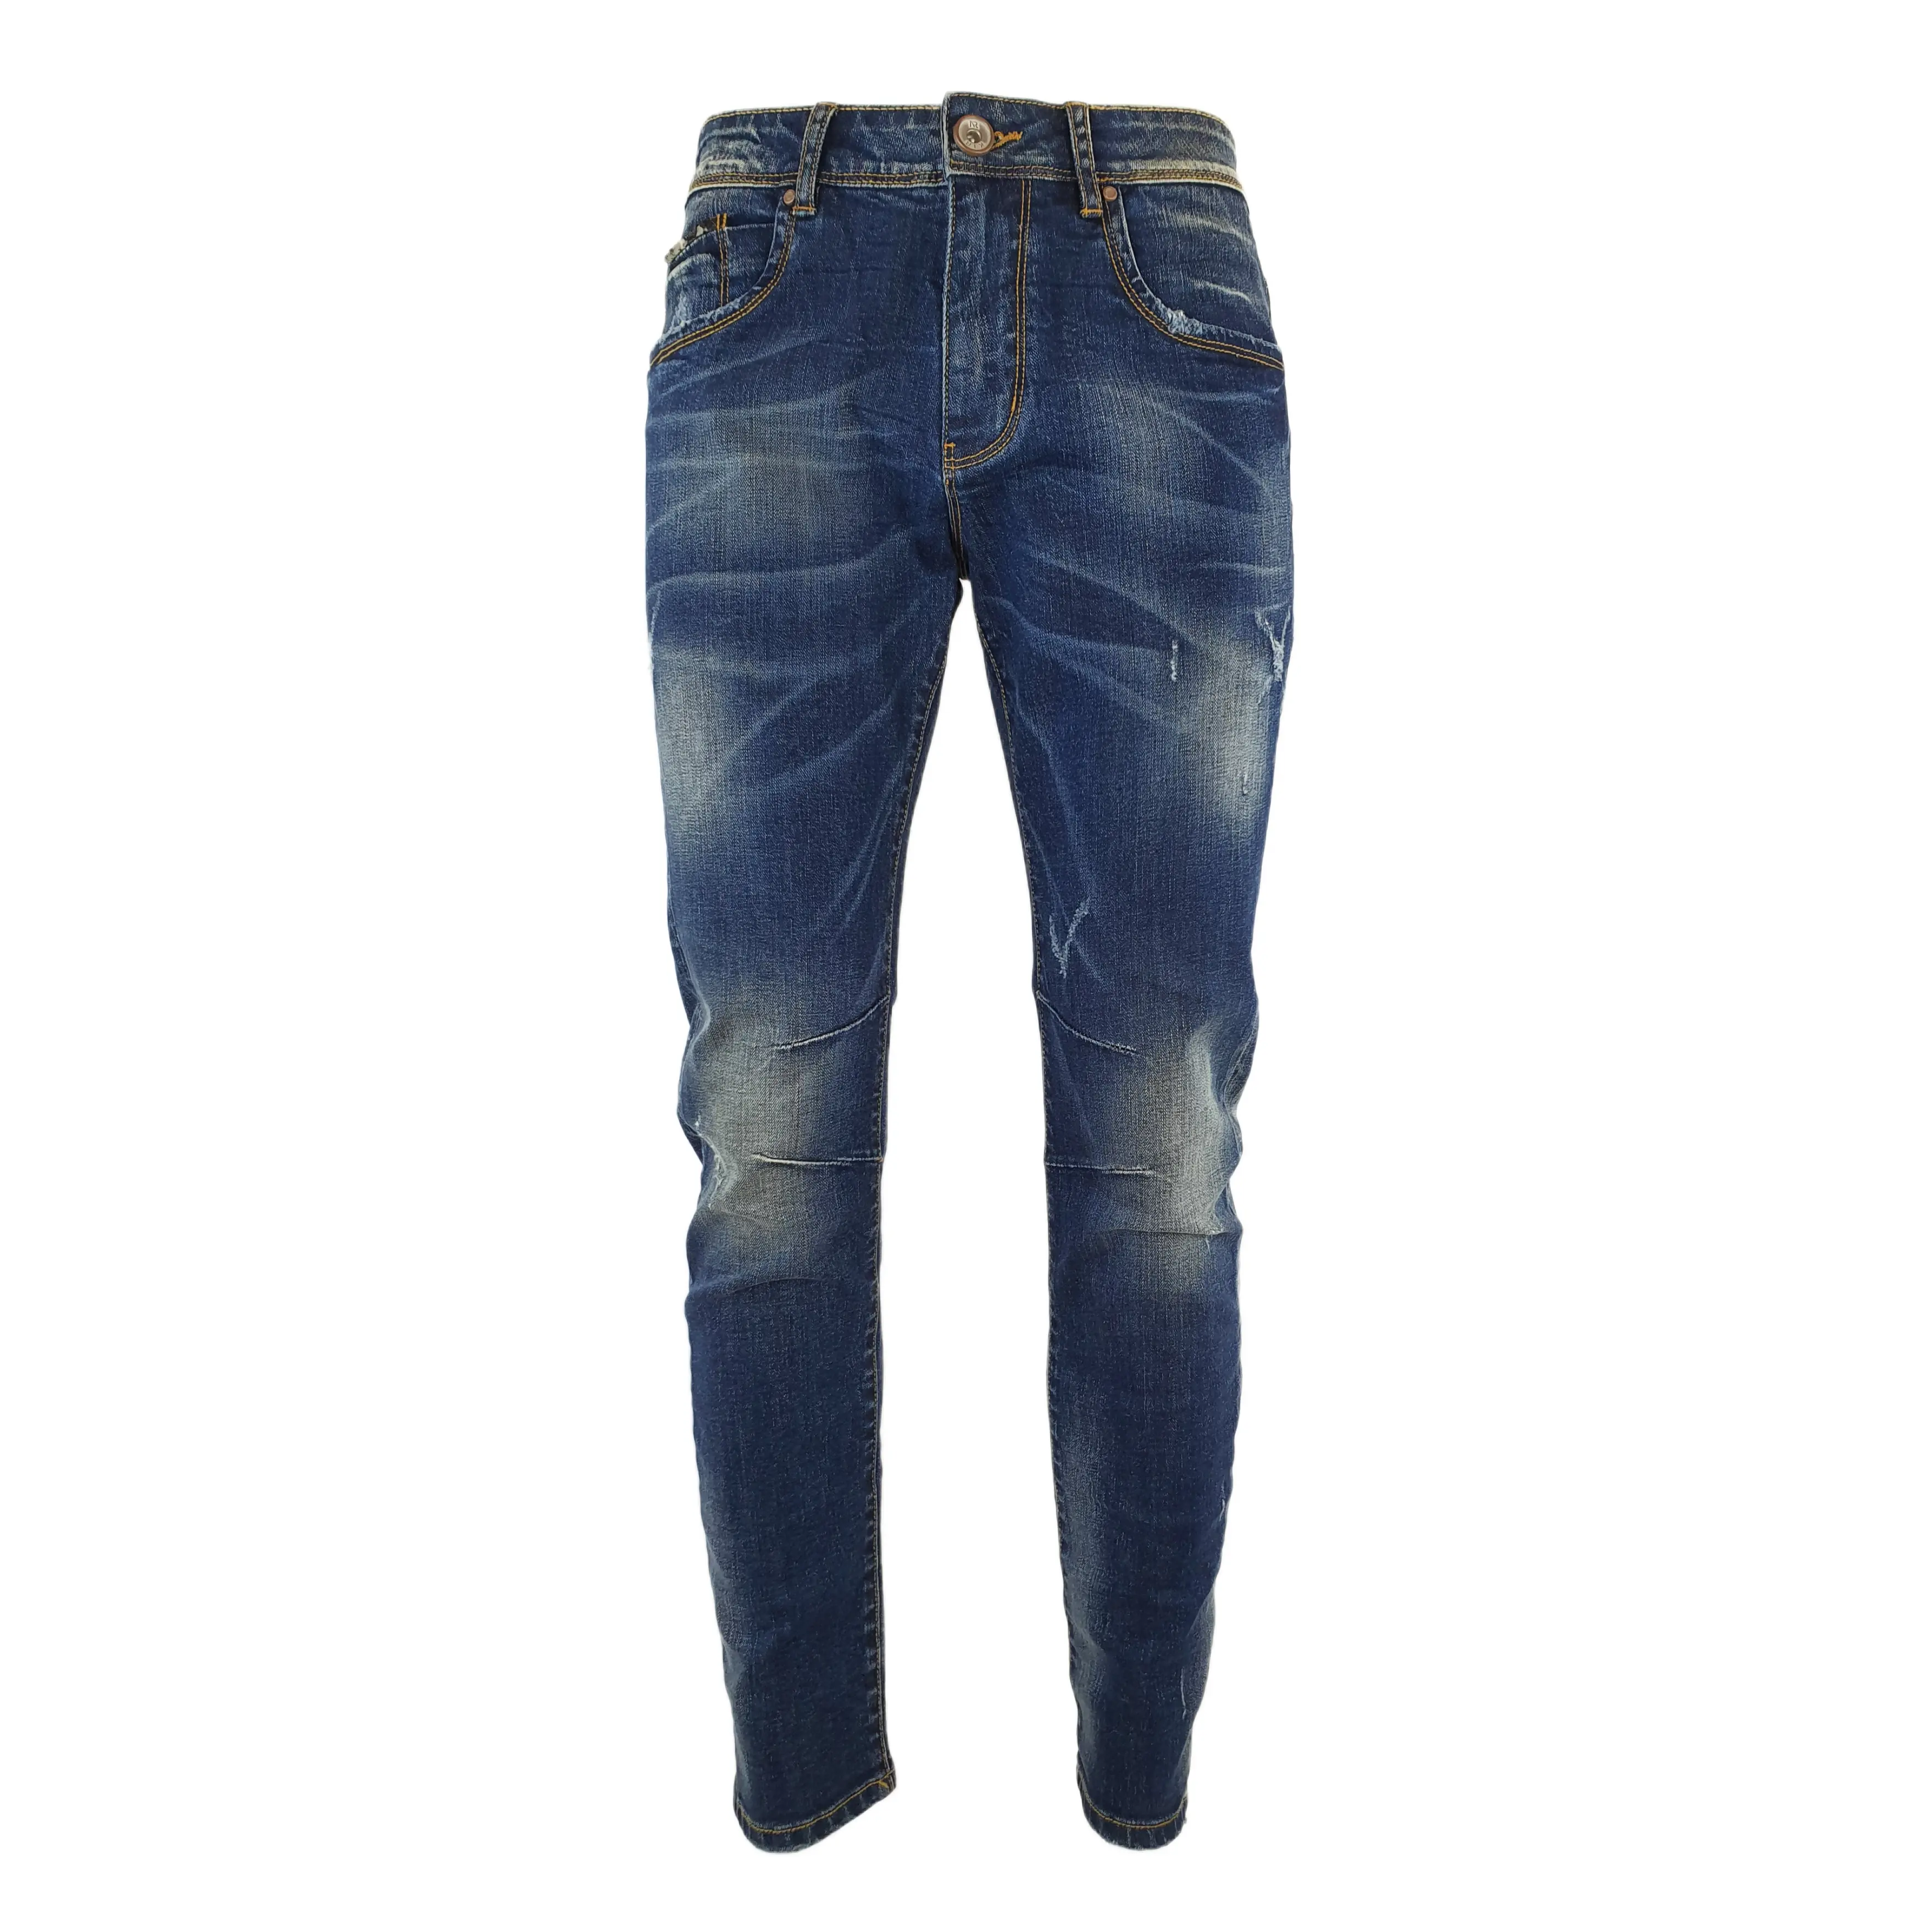 OEM New Full Length Slim Fit England Style Ripped Denim Men's Jeans with Paint